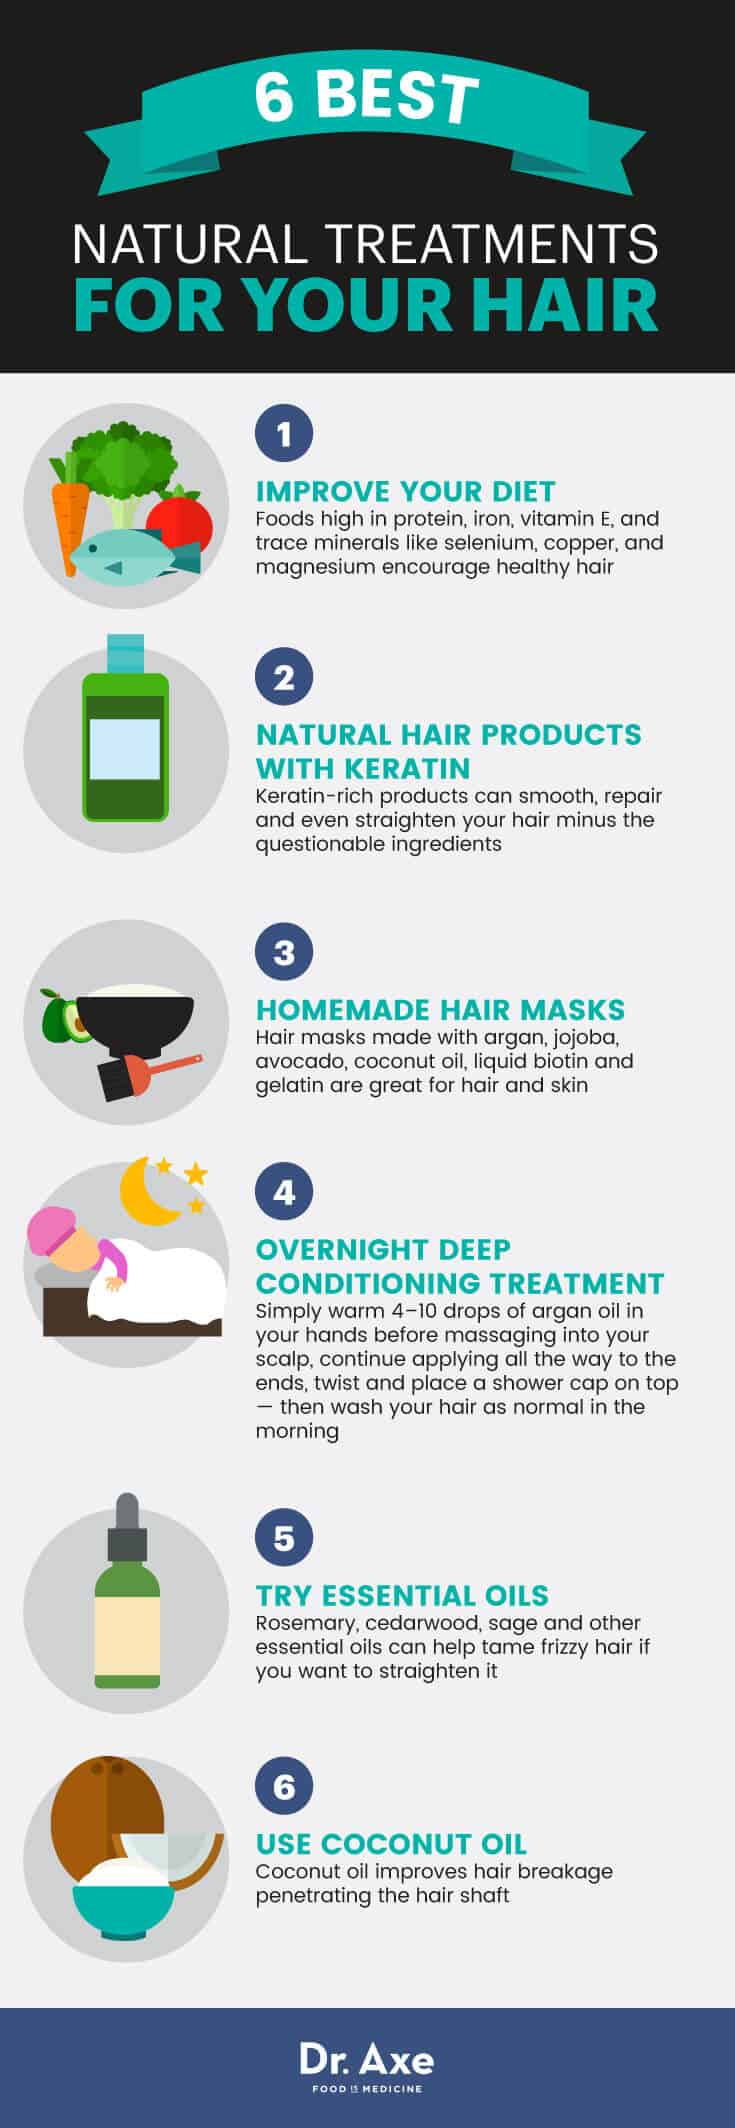 Natural treatments for hair - Dr. Axe